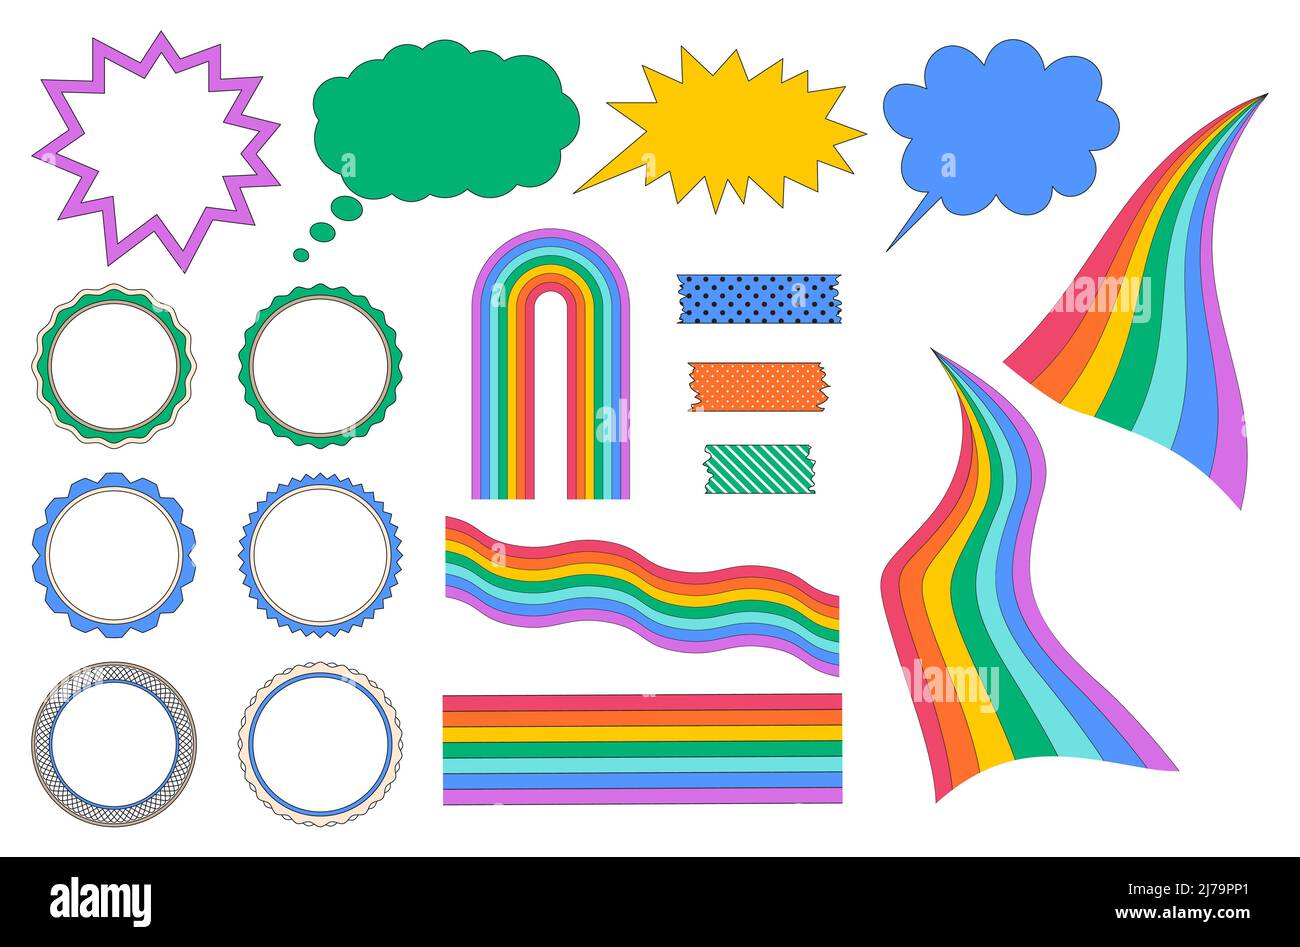 A set of decorative elements with a stroke, wavy rainbows, patterned tape, frames, a speech bubble, a thought cloud. Bright colored vector illustratio Stock Vector